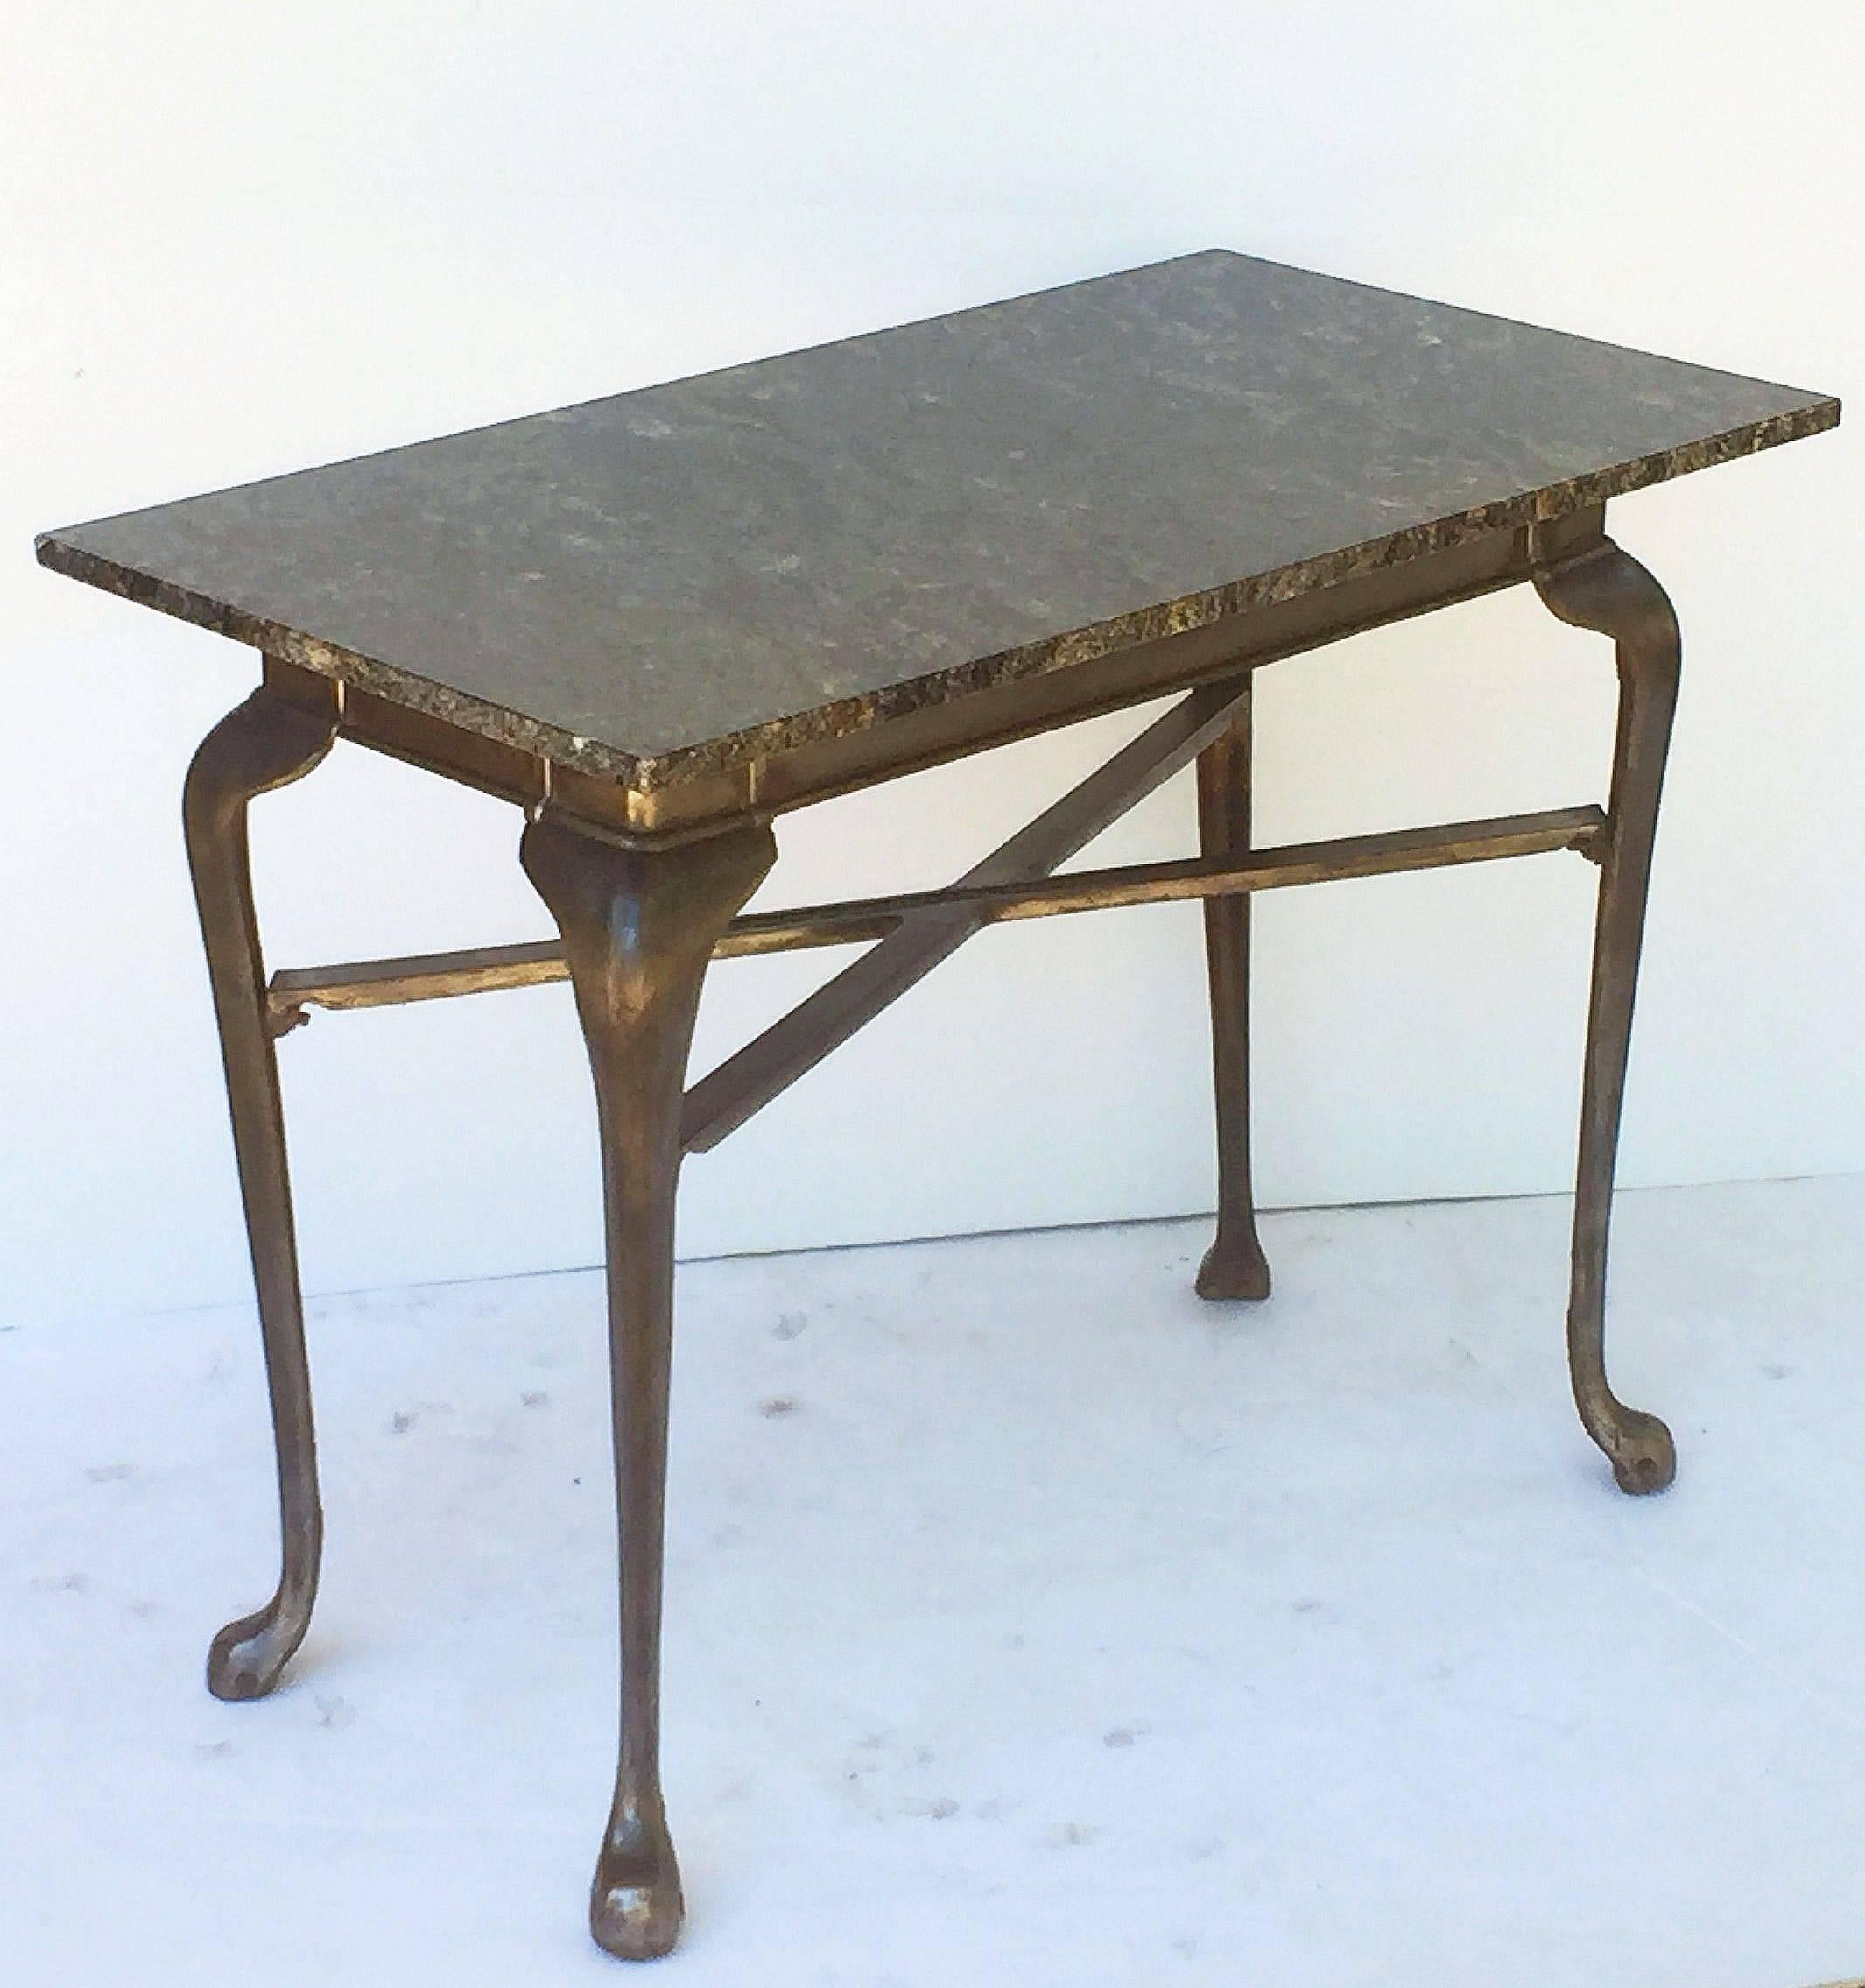 A fine English pub or bistro table of cast iron, made by Lawn and Howarth, Manchester, with a removable rectangular top of figured granite, set upon the iron base featuring a frieze with four cabriole legs and crossbar stretcher.

The stretcher